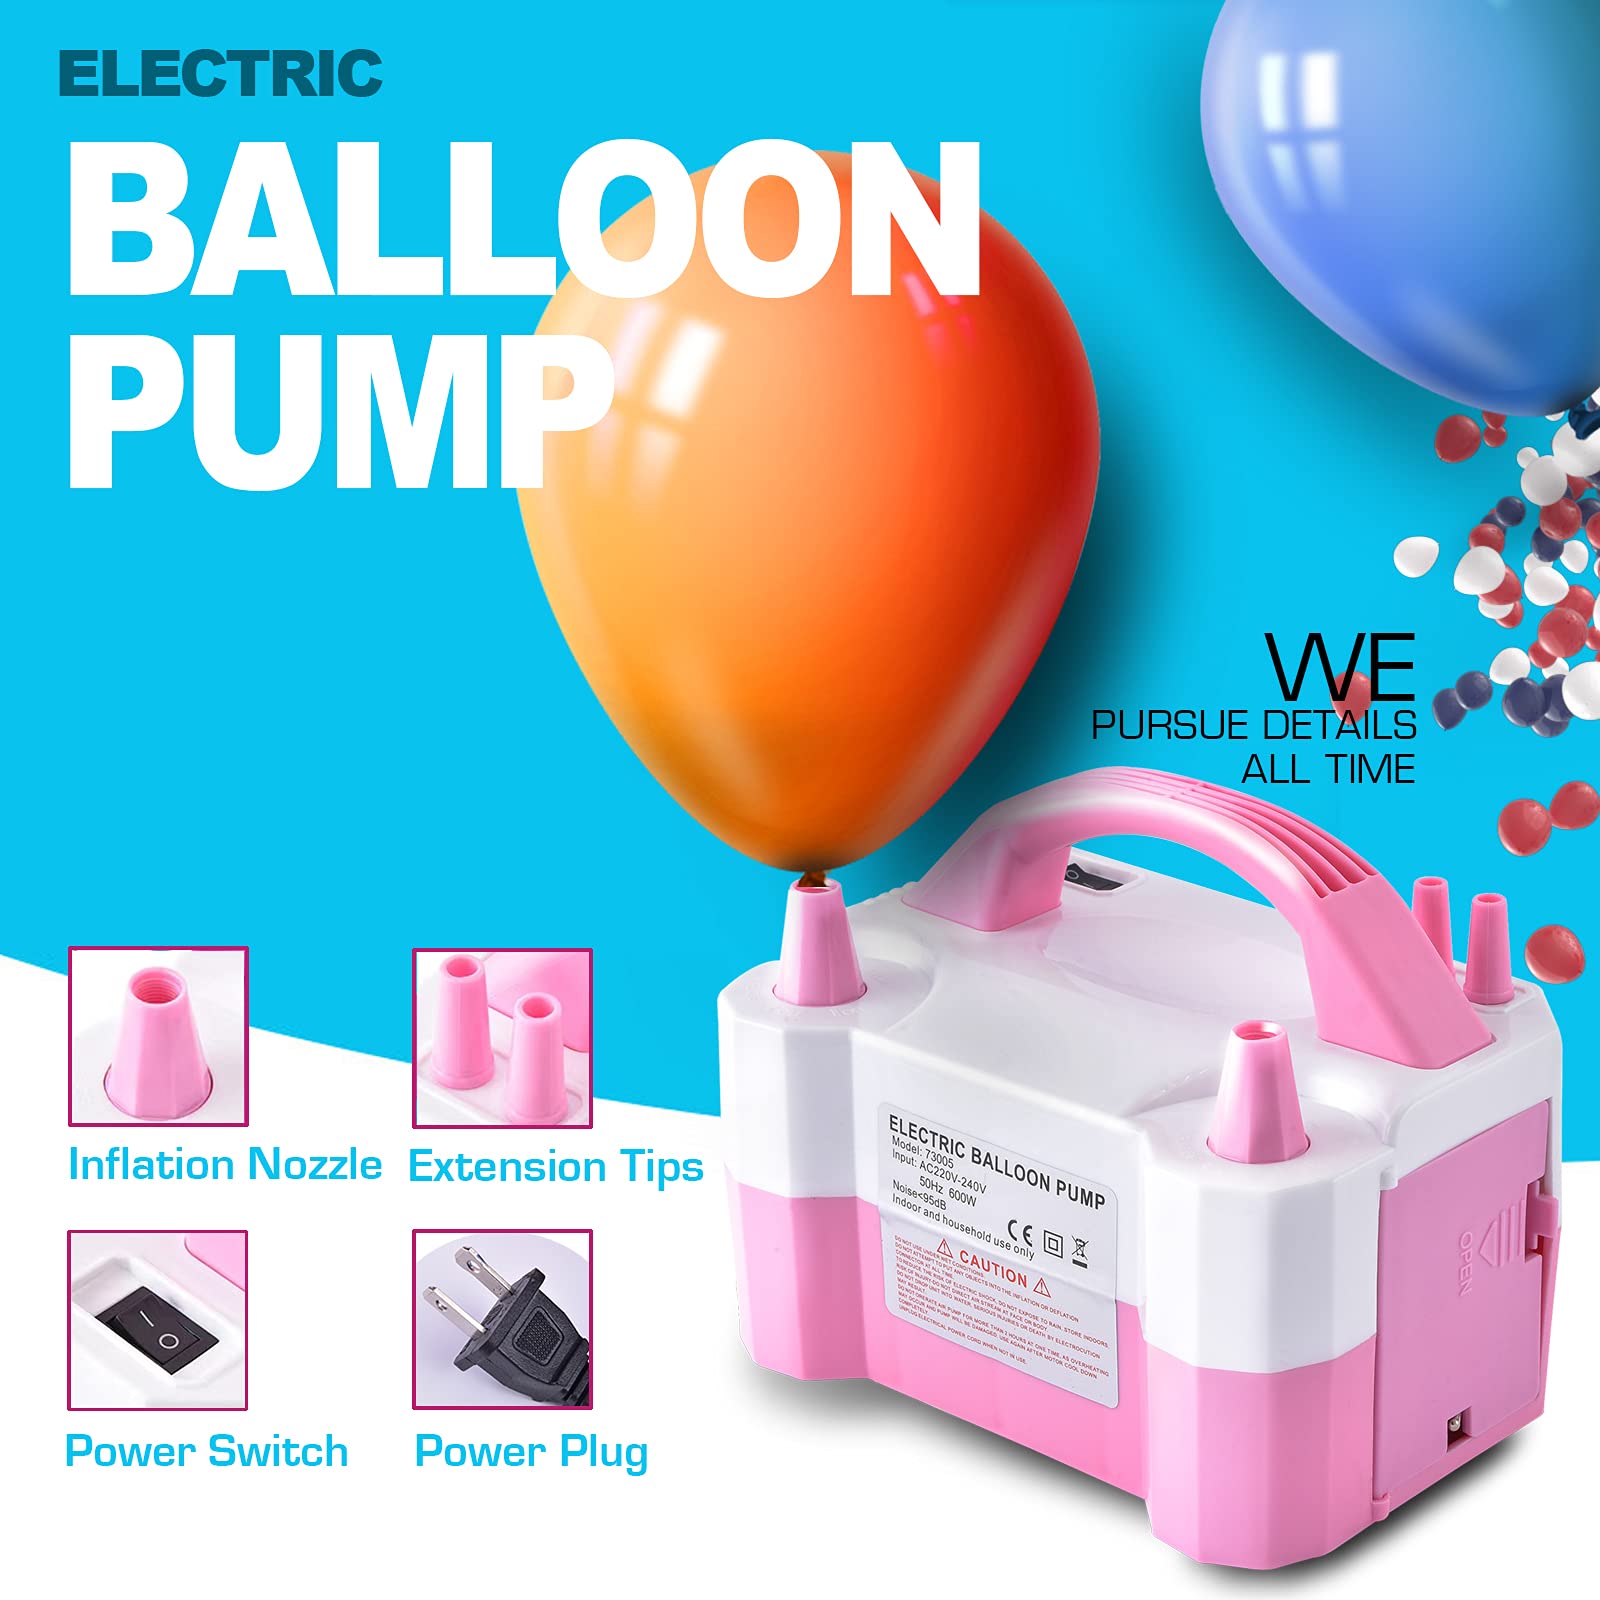 YIKEDA Electric Air Balloon Pump, Portable Dual Nozzle Electric Balloon Inflator/Blower for Party Decoration,Used to Quickly Fill Balloons - 110V 600W [Pink]